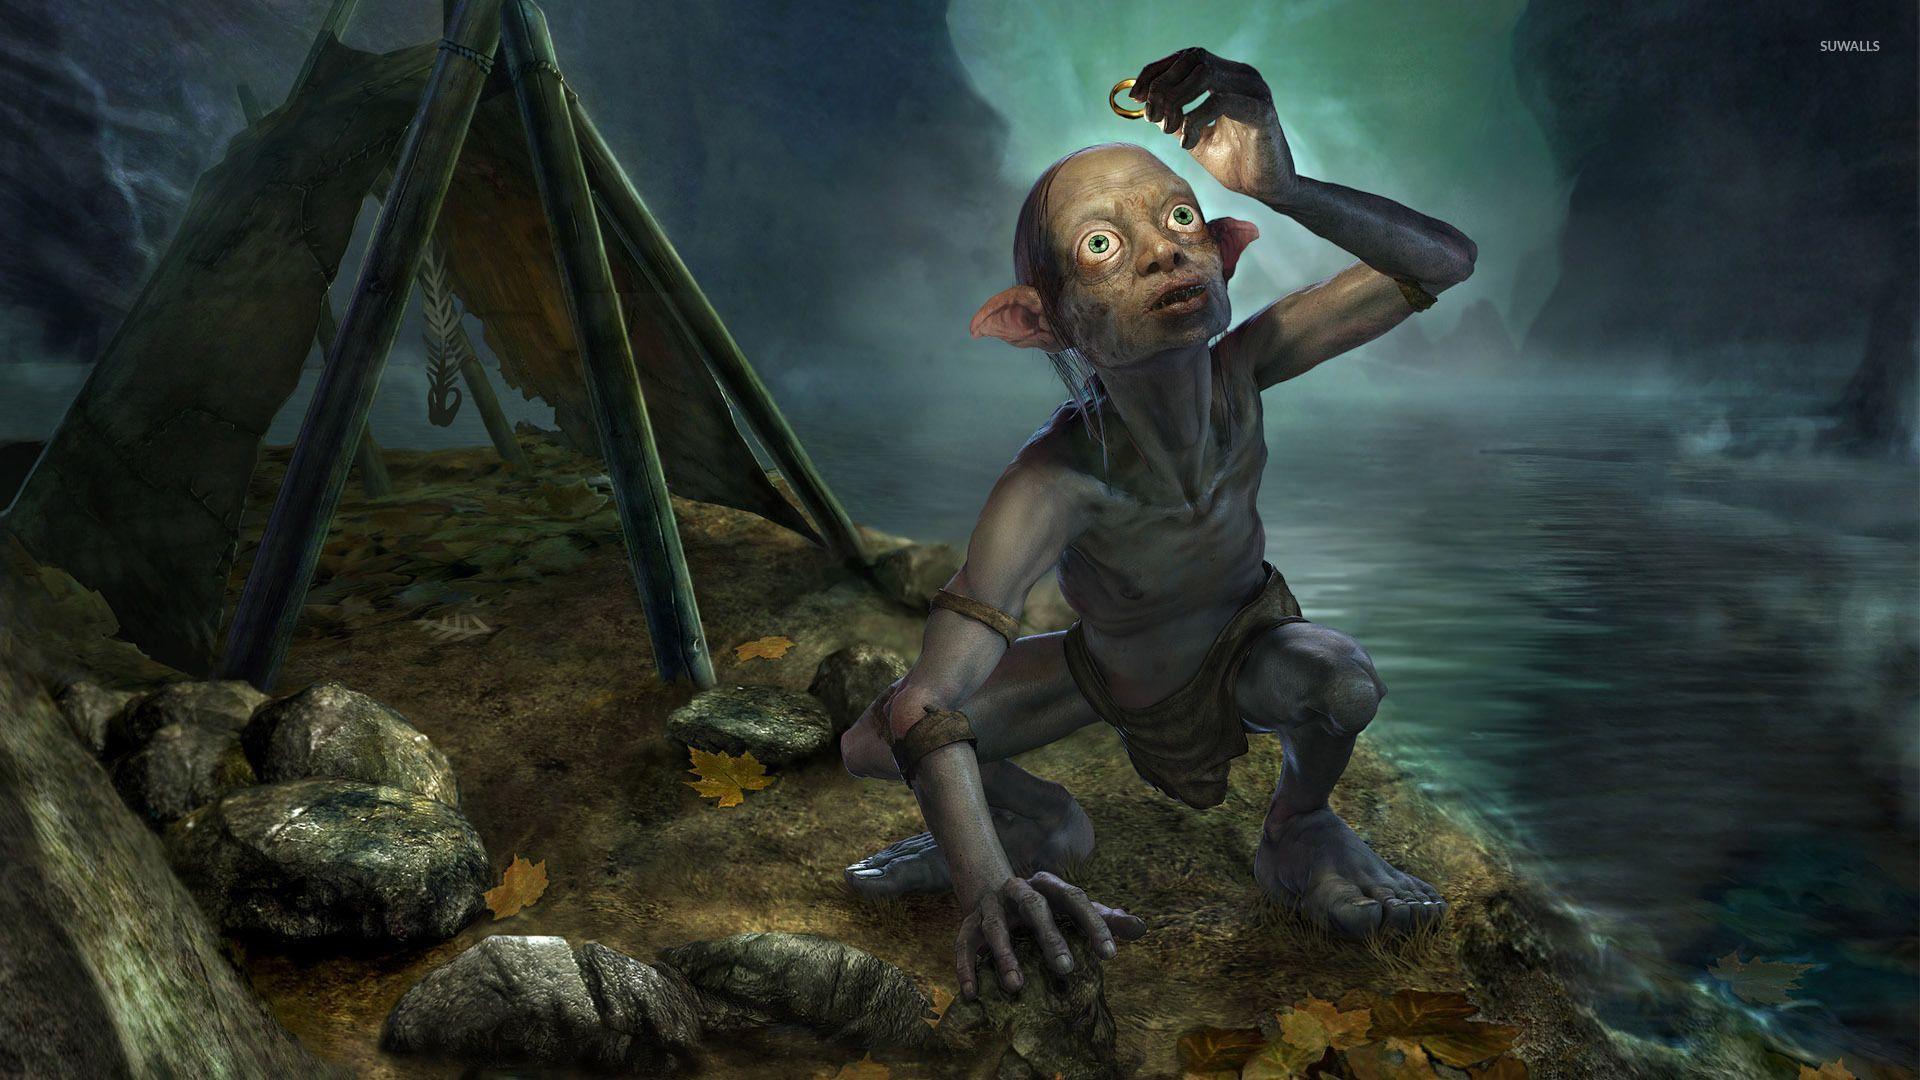 Gollum holding One Ring Lord of the Rings wallpaper. Le